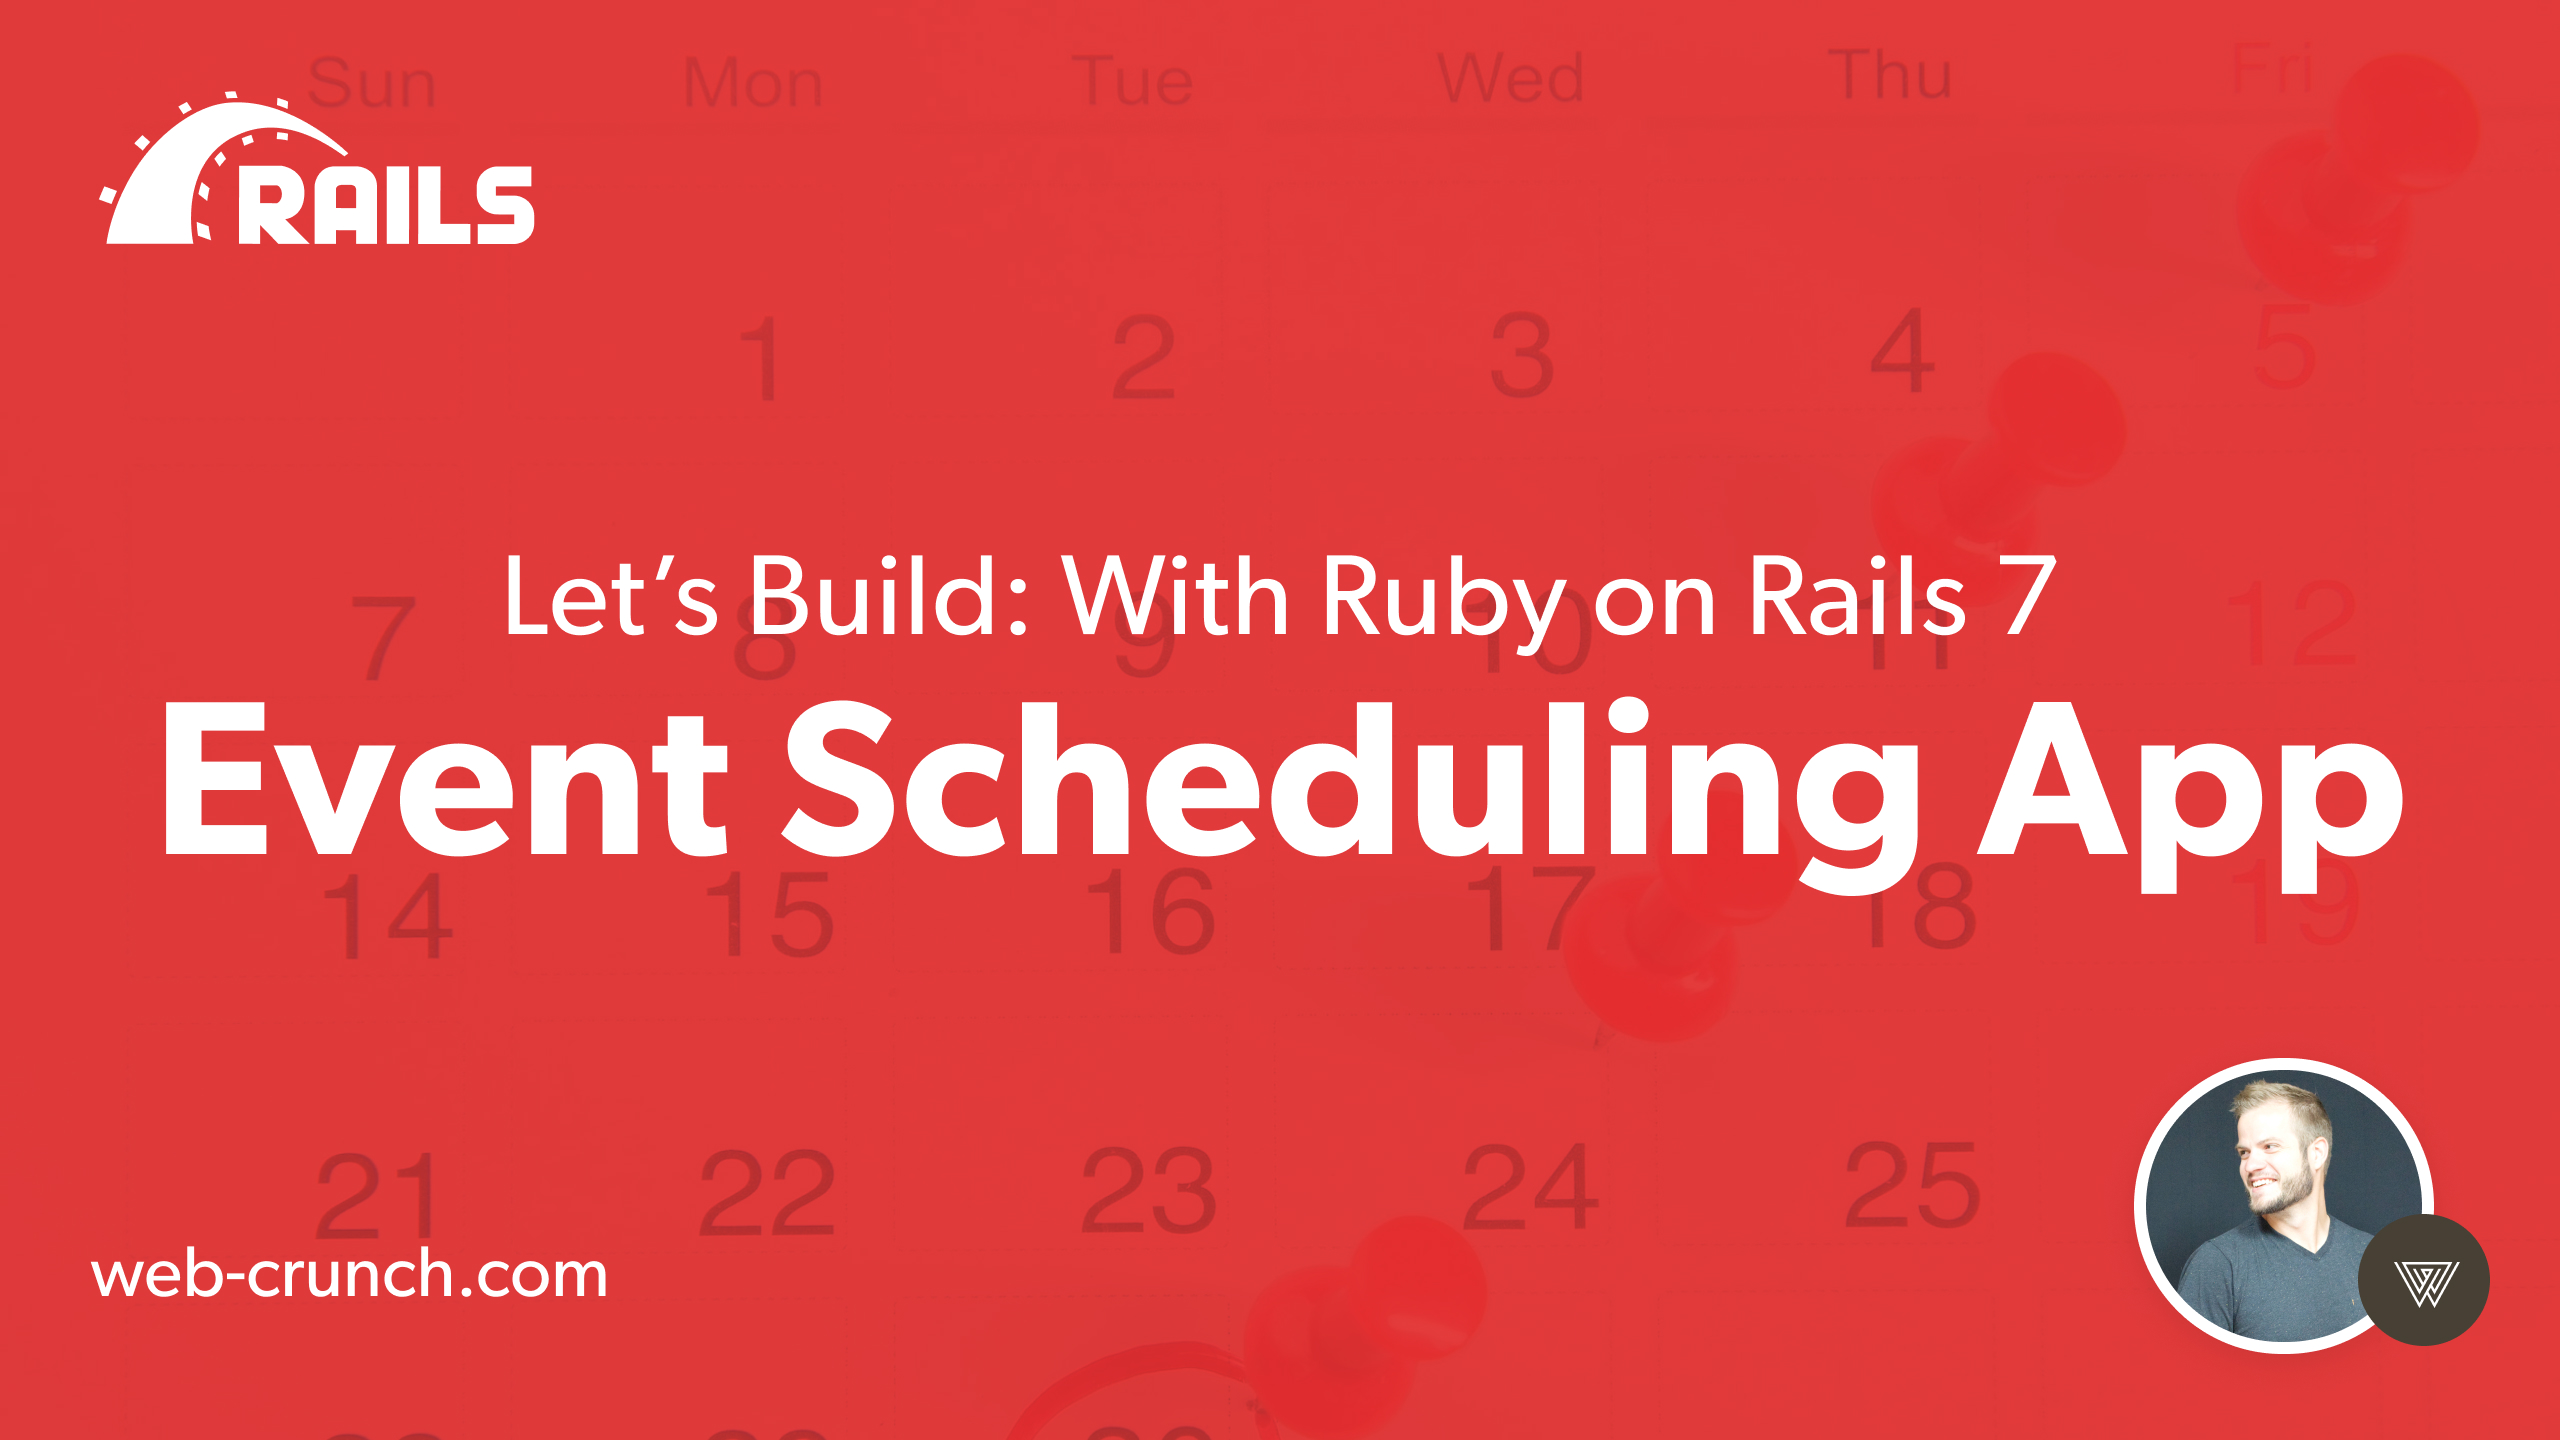 Let's Build an event scheduling app with Ruby on Rails 7